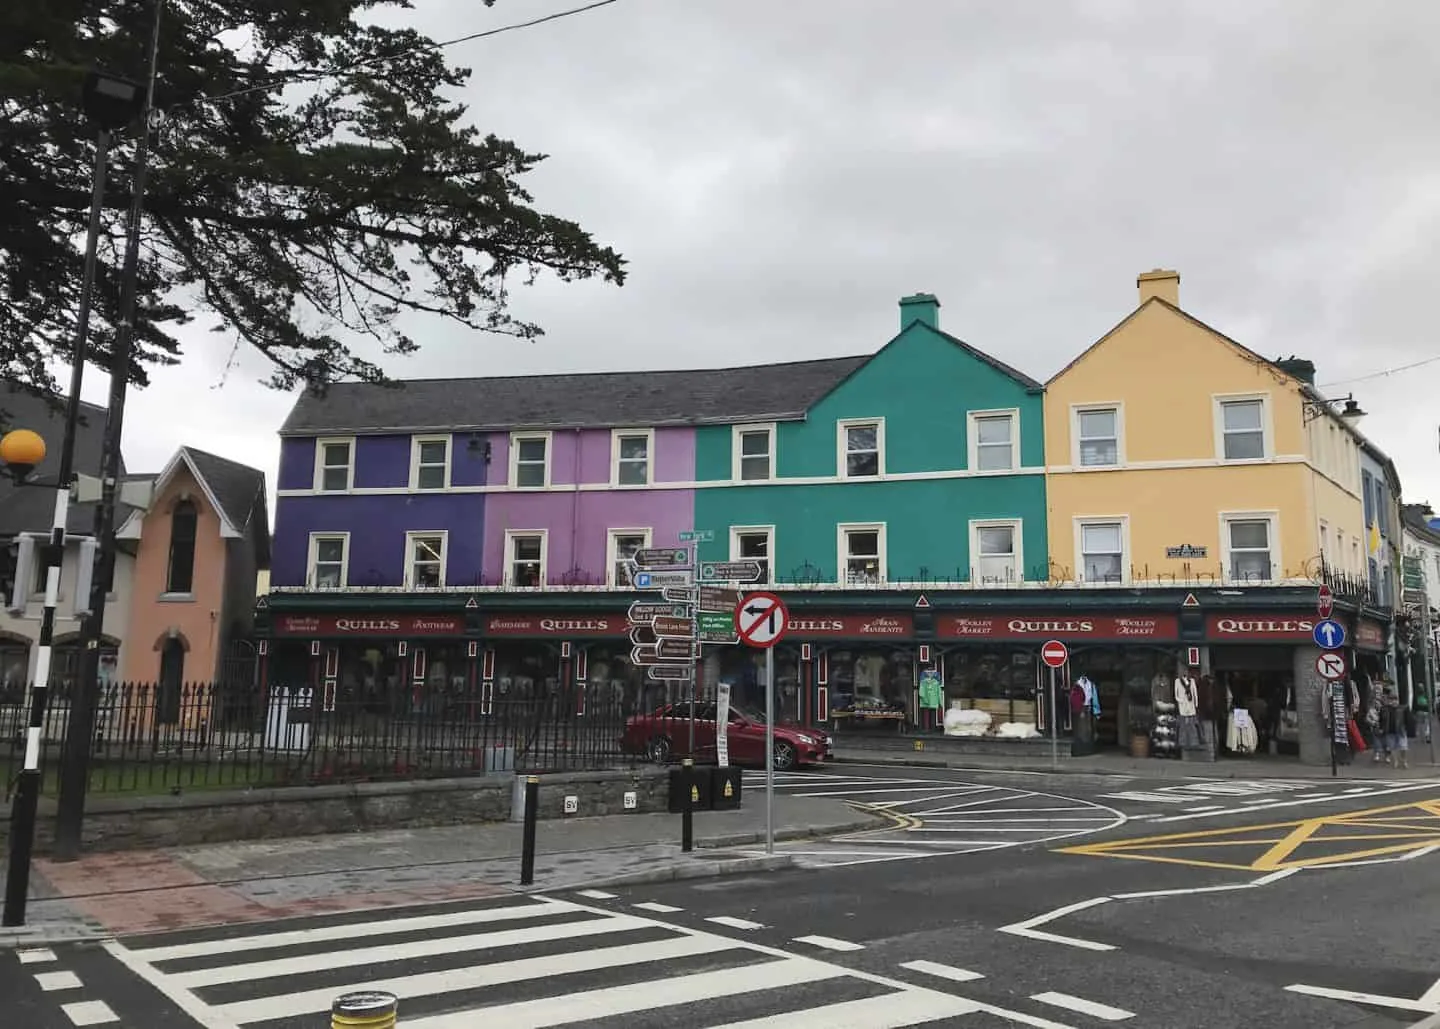 Kenmare is an adorable and colourful small town in Ireland, and definitely worth adding to your road trip itinerary